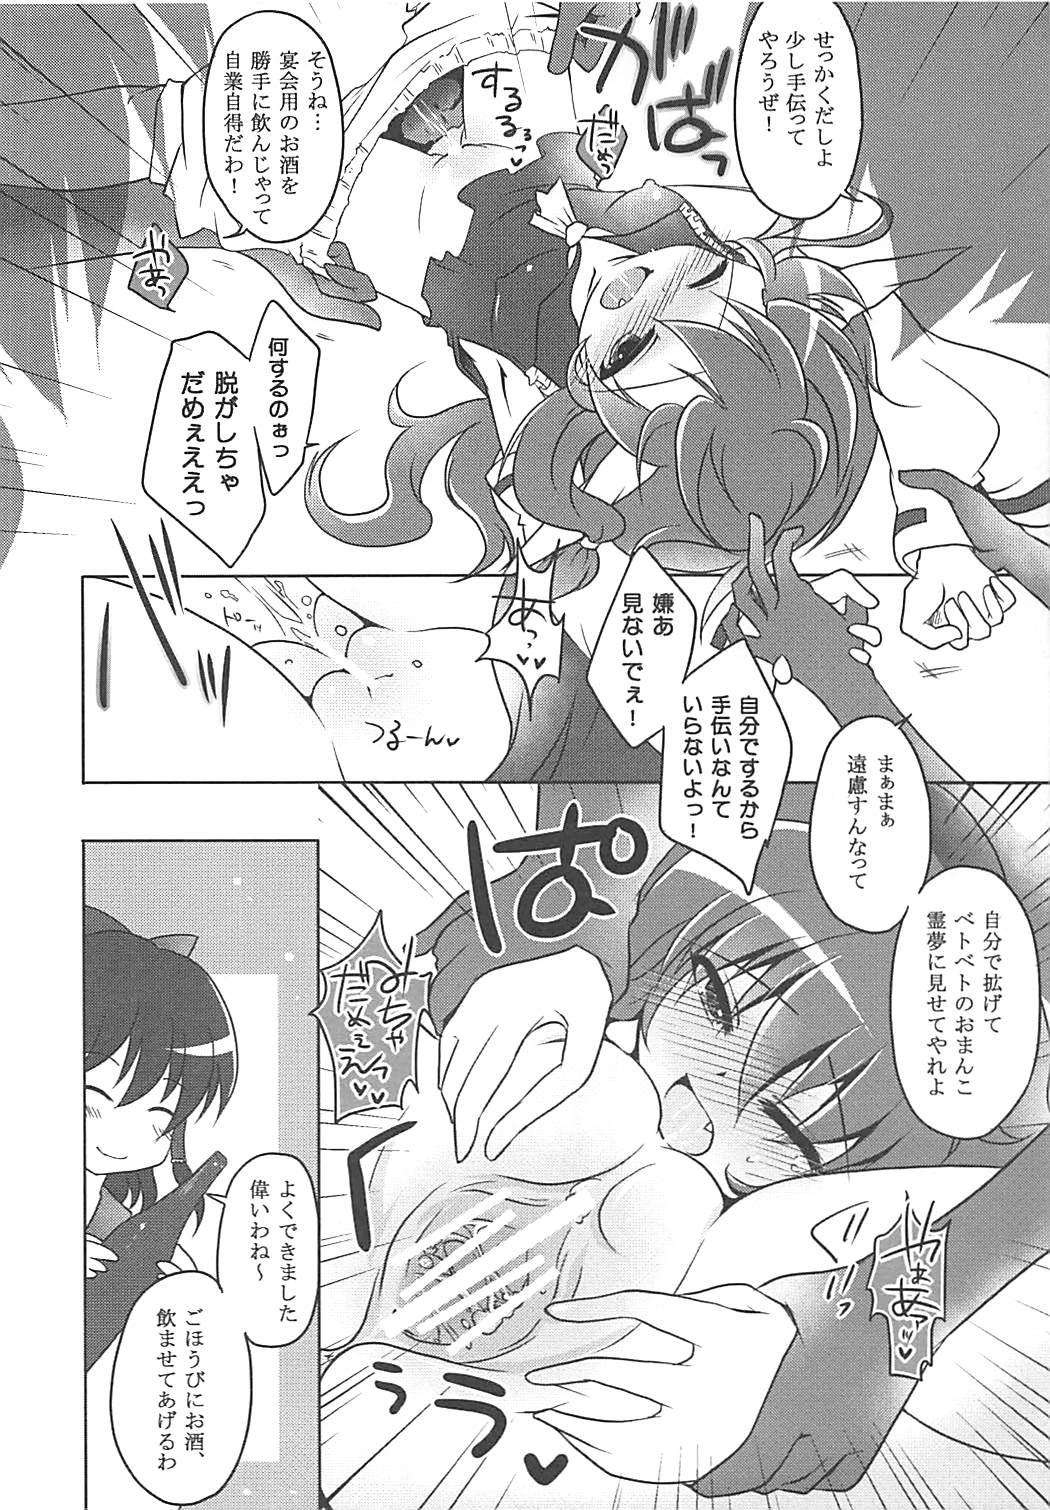 Sharing Suimiko Suika. - Touhou project Interracial Sex - Page 7